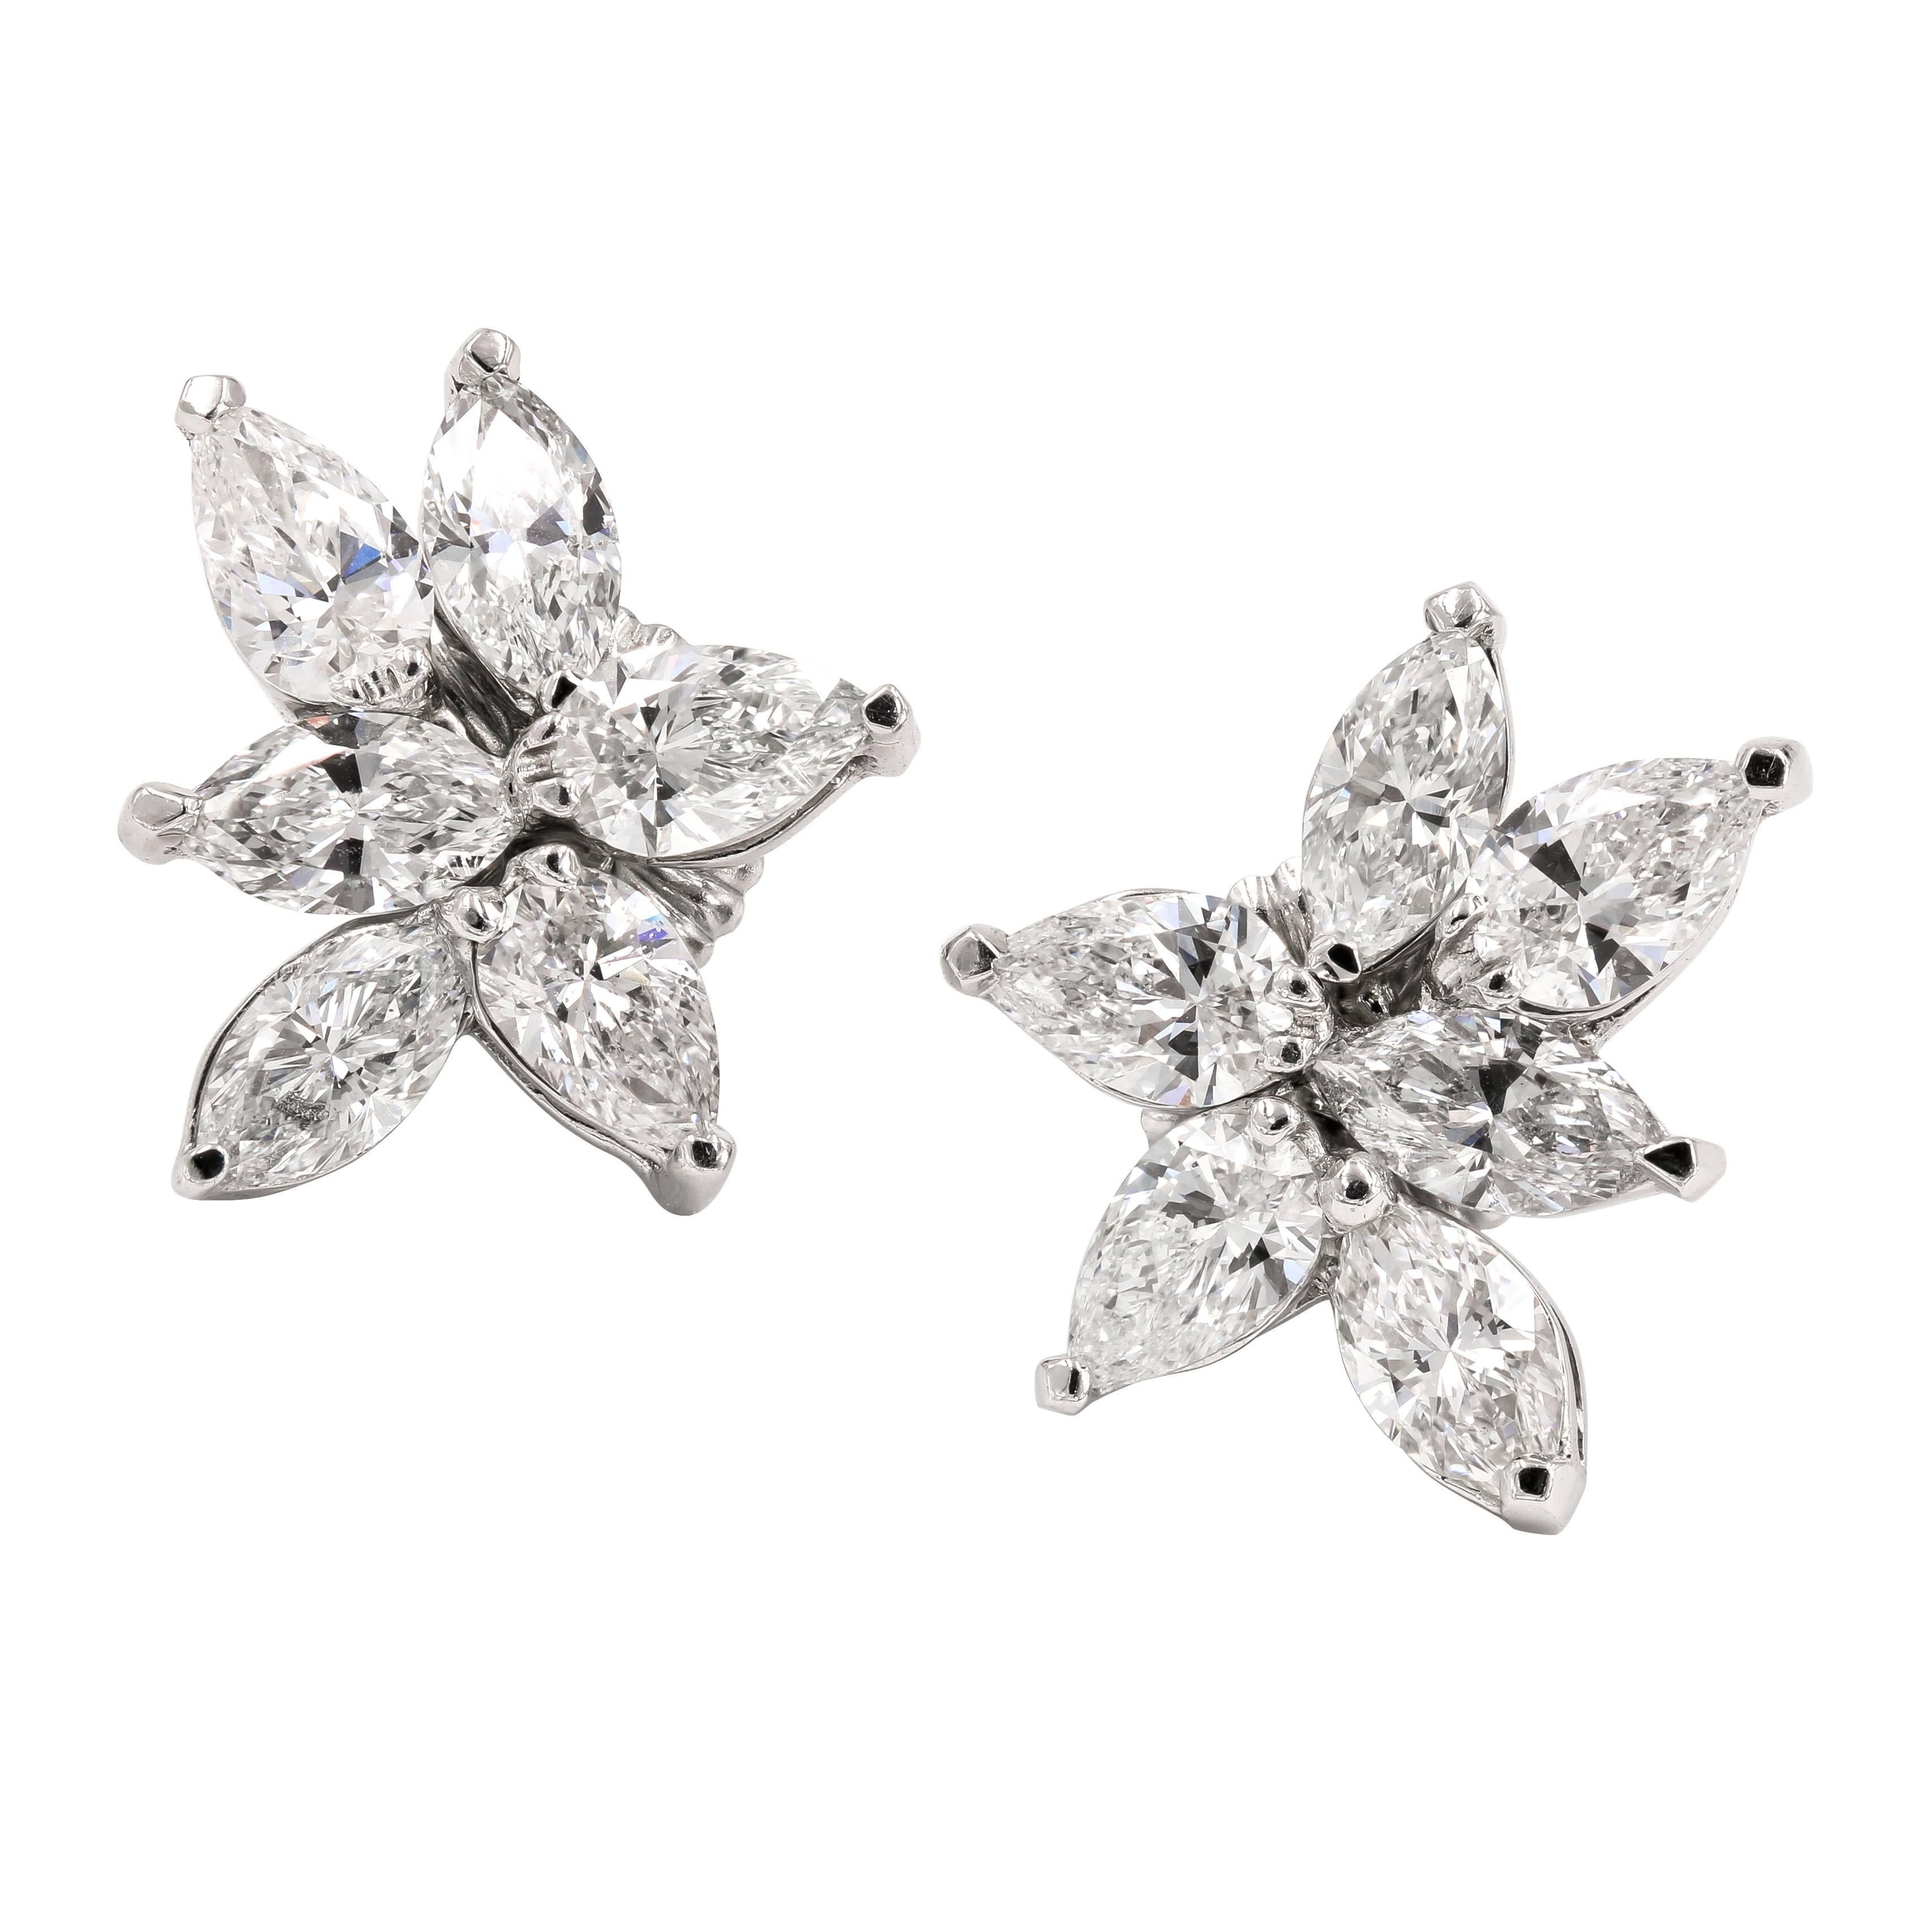 These Chameleon style earrings can be worn all diamonds, or a combination of diamonds and either blue or yellow sapphires to create completely different looks. The stones are marquise cut and pear shaped.
The base earring has 6 diamonds = 3.03tw. 